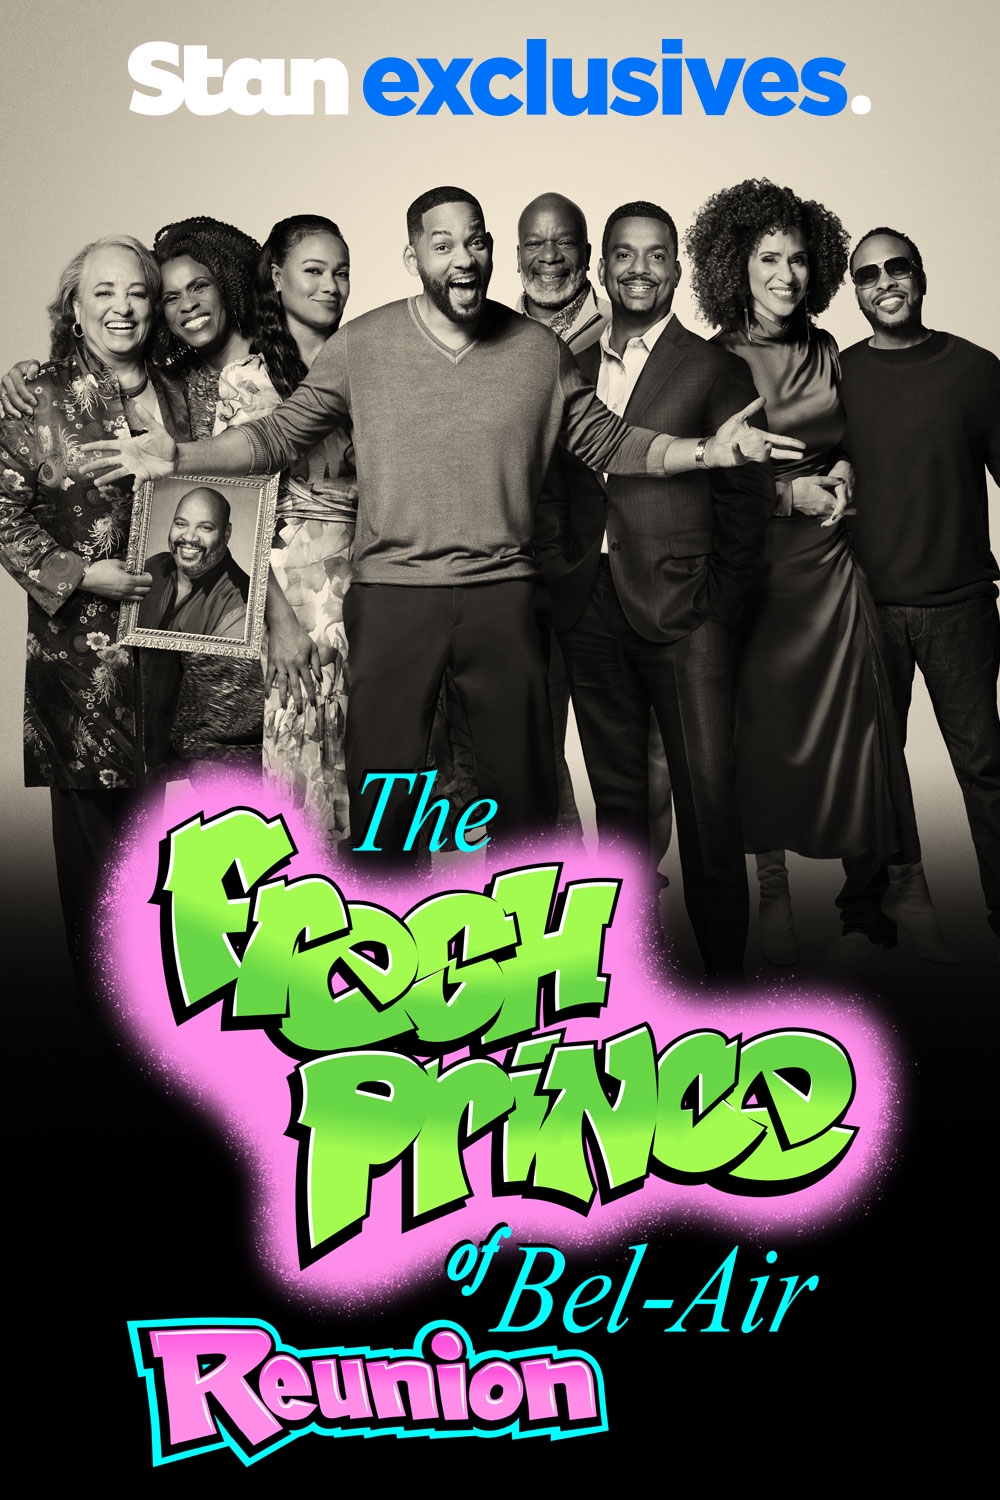 watch full fresh prince of bel air episodes online free megavideo